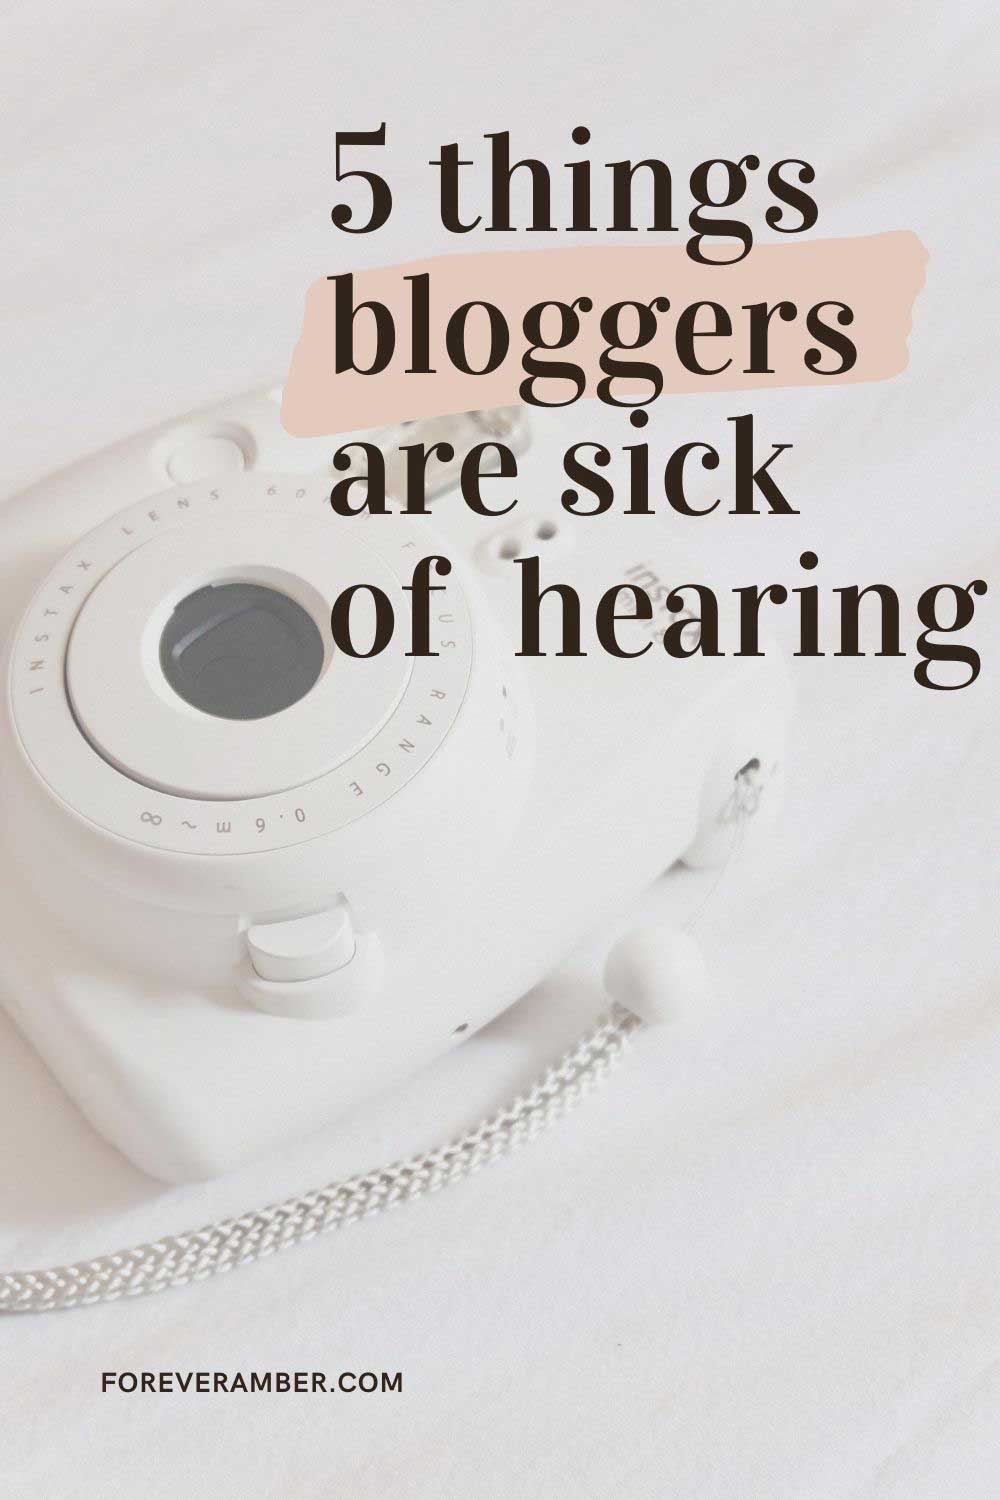 5 things bloggers are sick of hearing